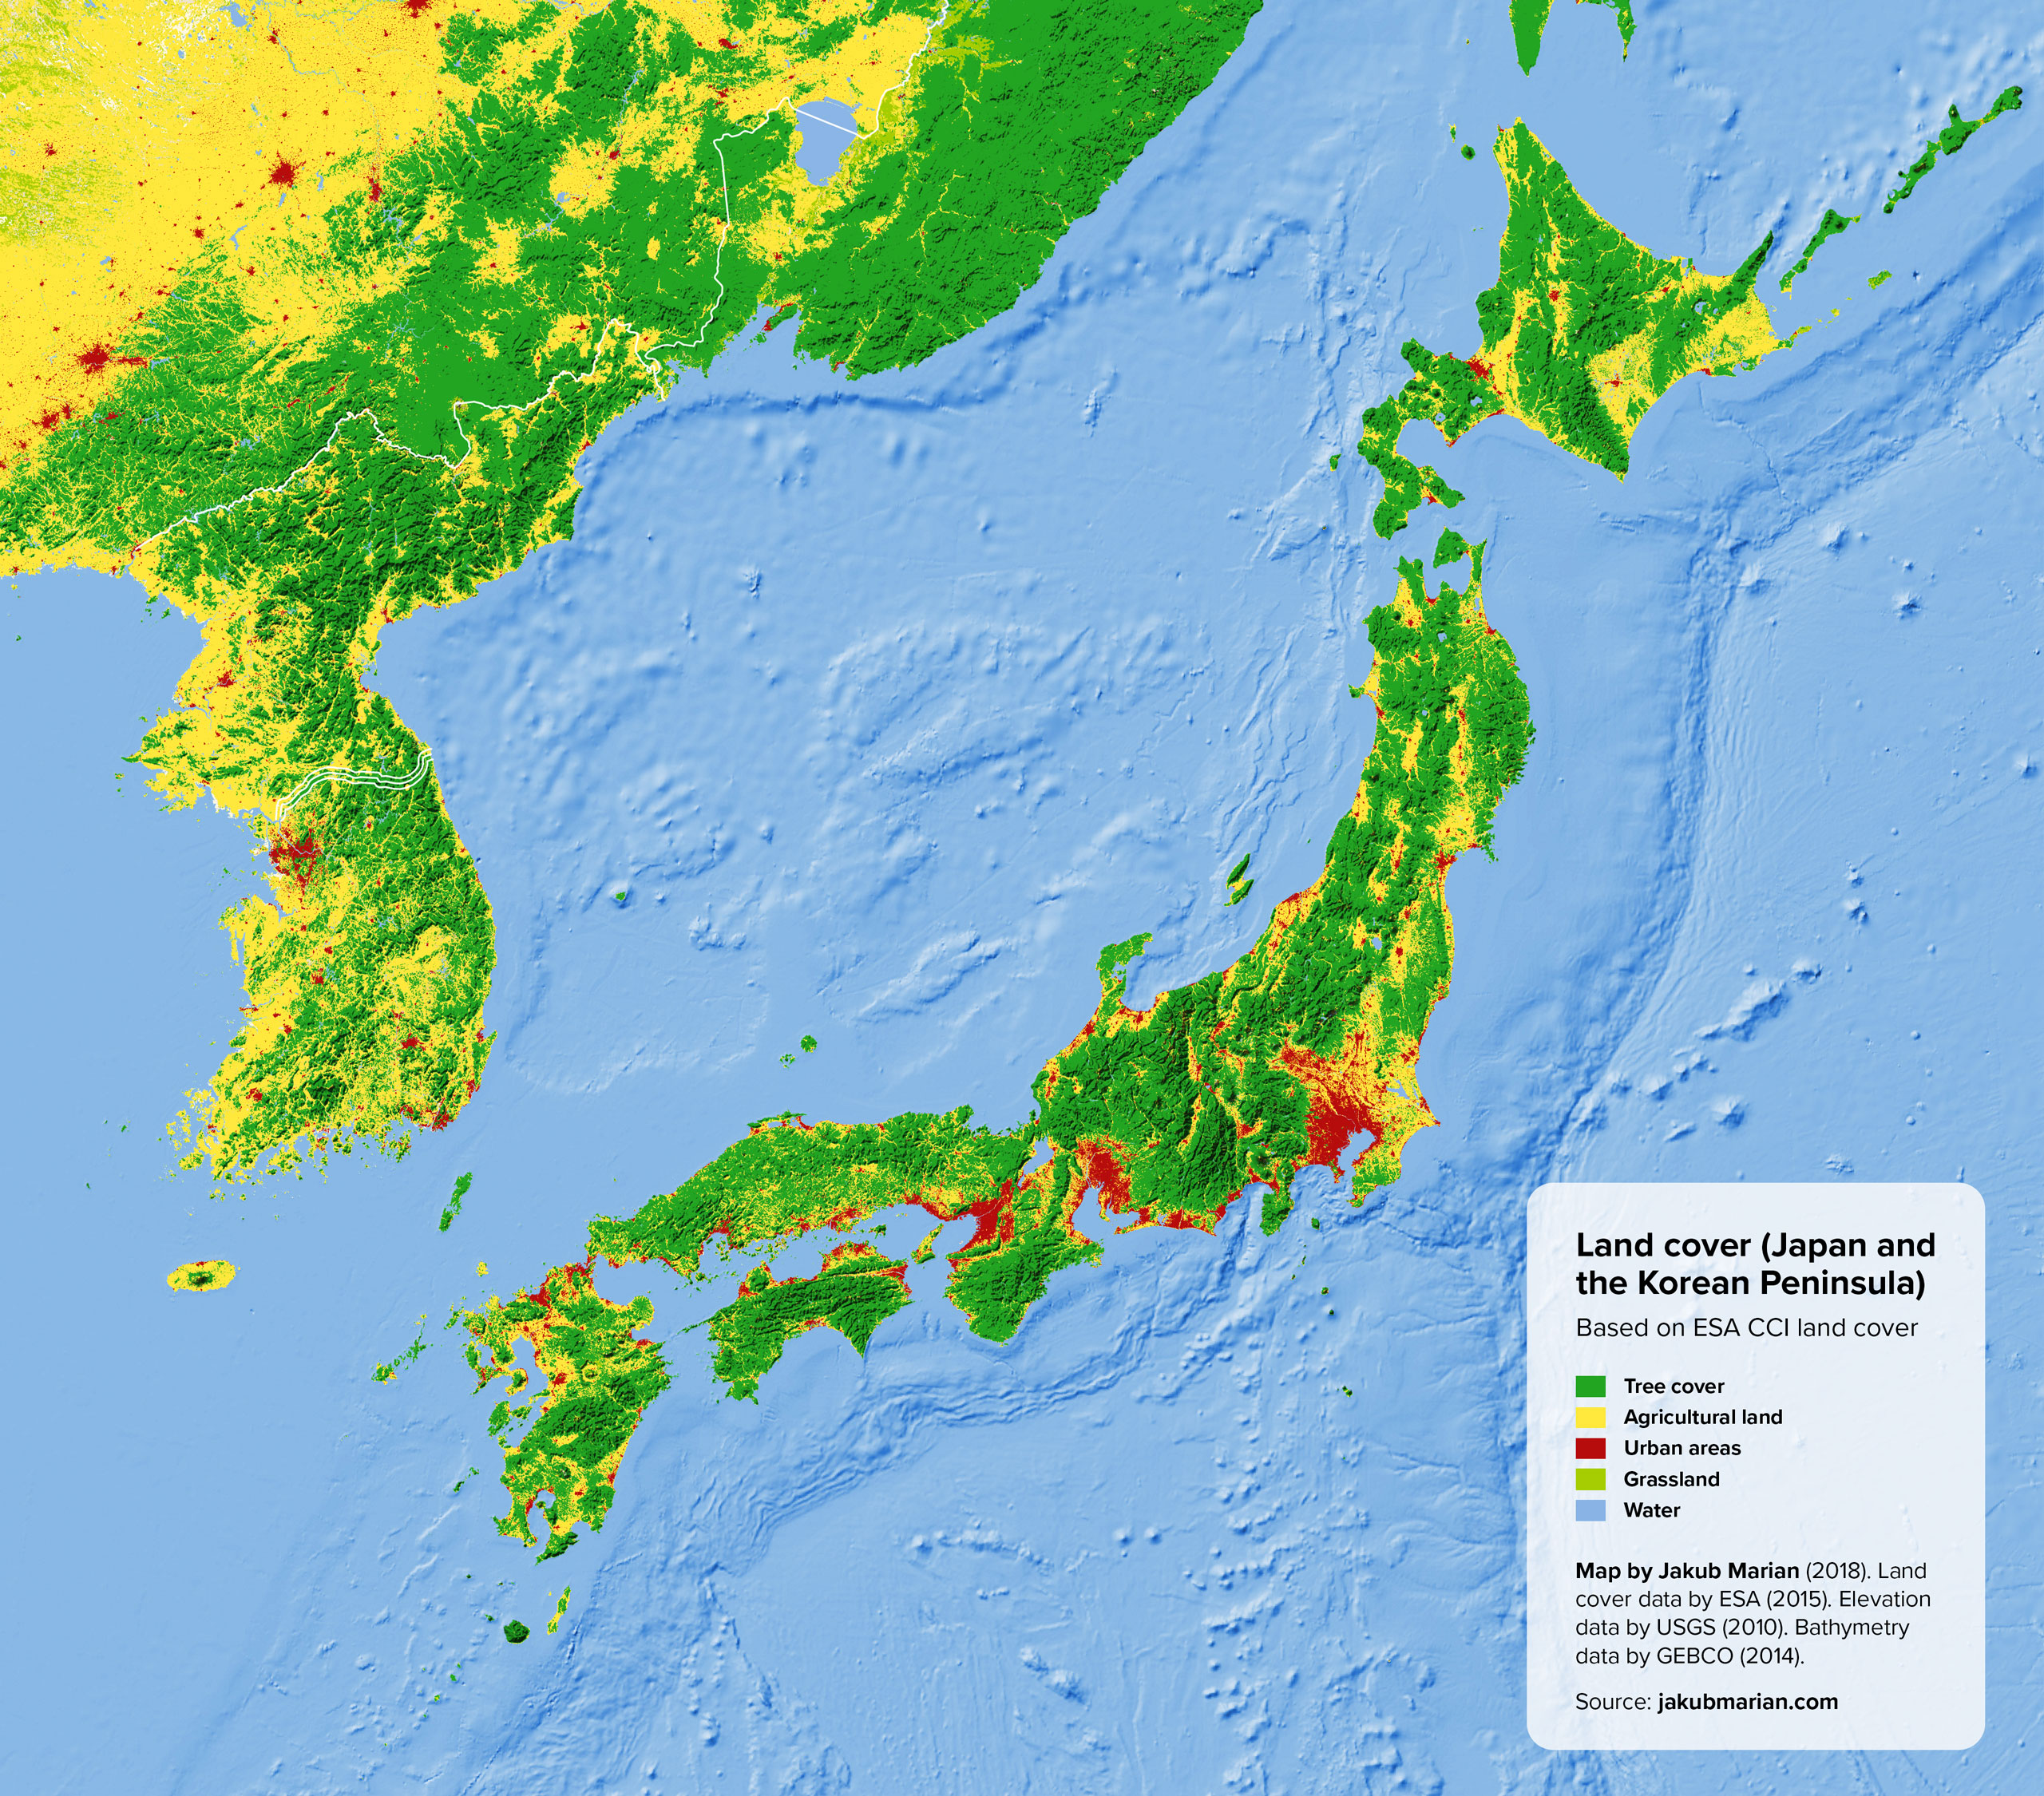 Land cover of Japan and the Korean Peninsula